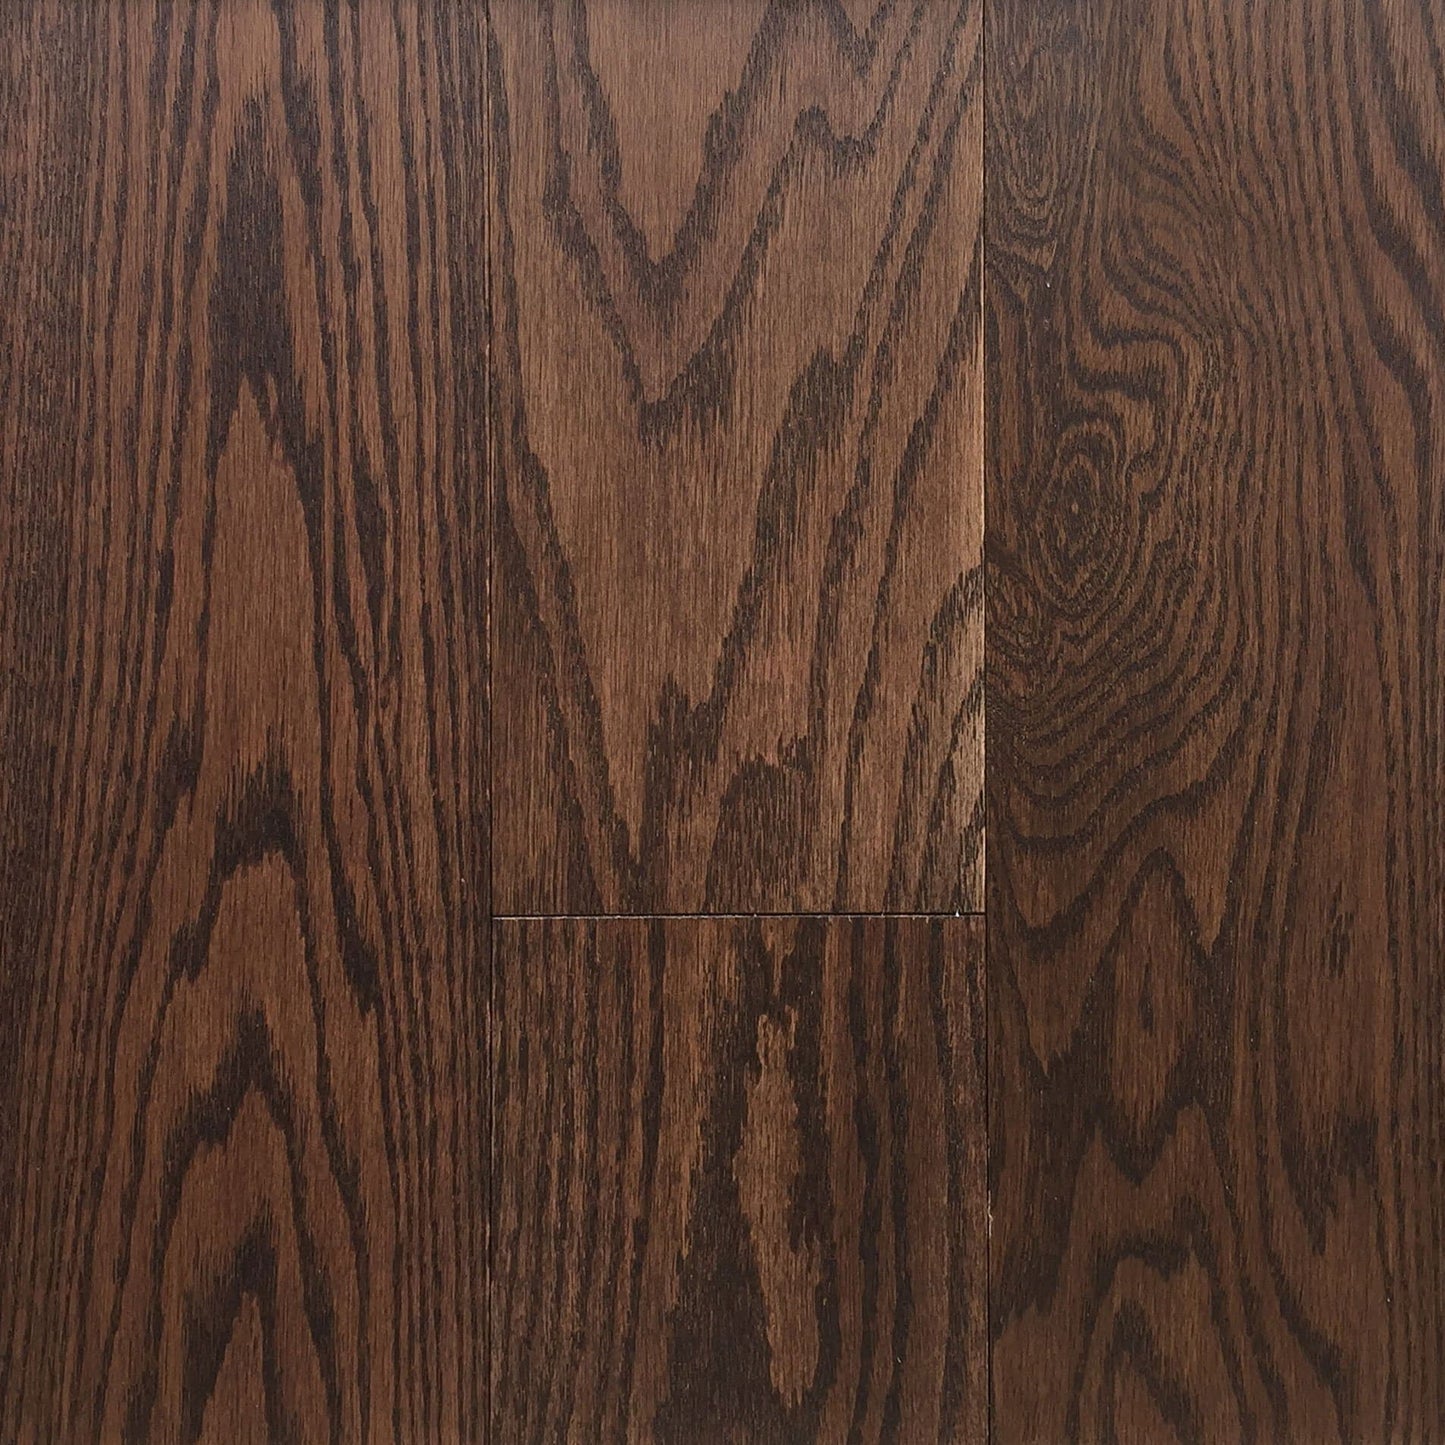 Hardwood Planet Red Oak Collection Wire Brushed Select & Better Cappuccino Hardwood Flooring